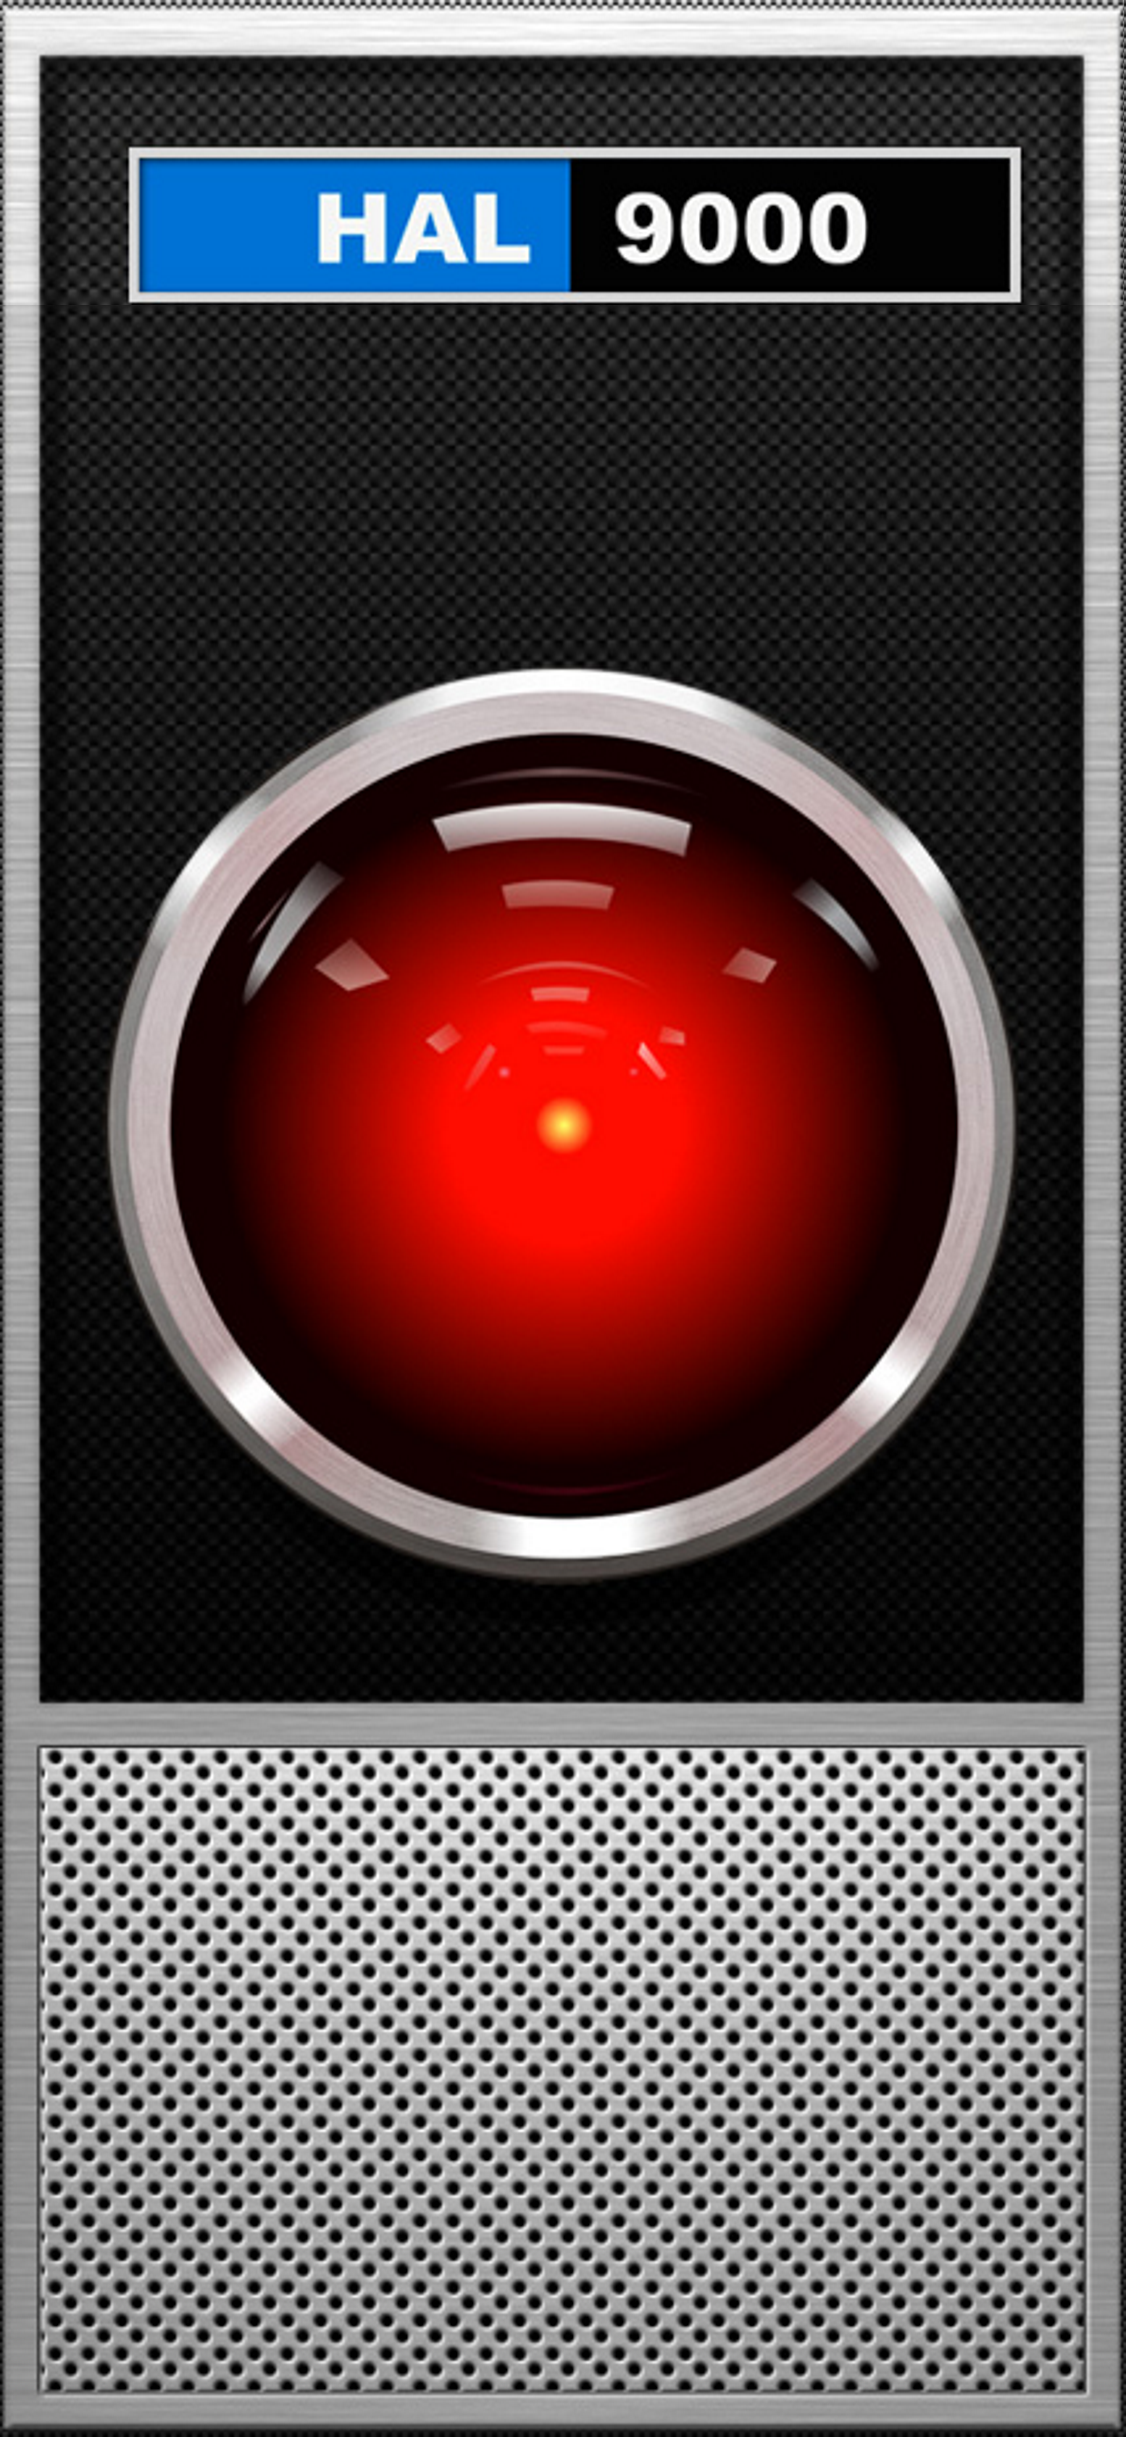 Hal9000 Interface Wallpaper For iPhone X Static Cool